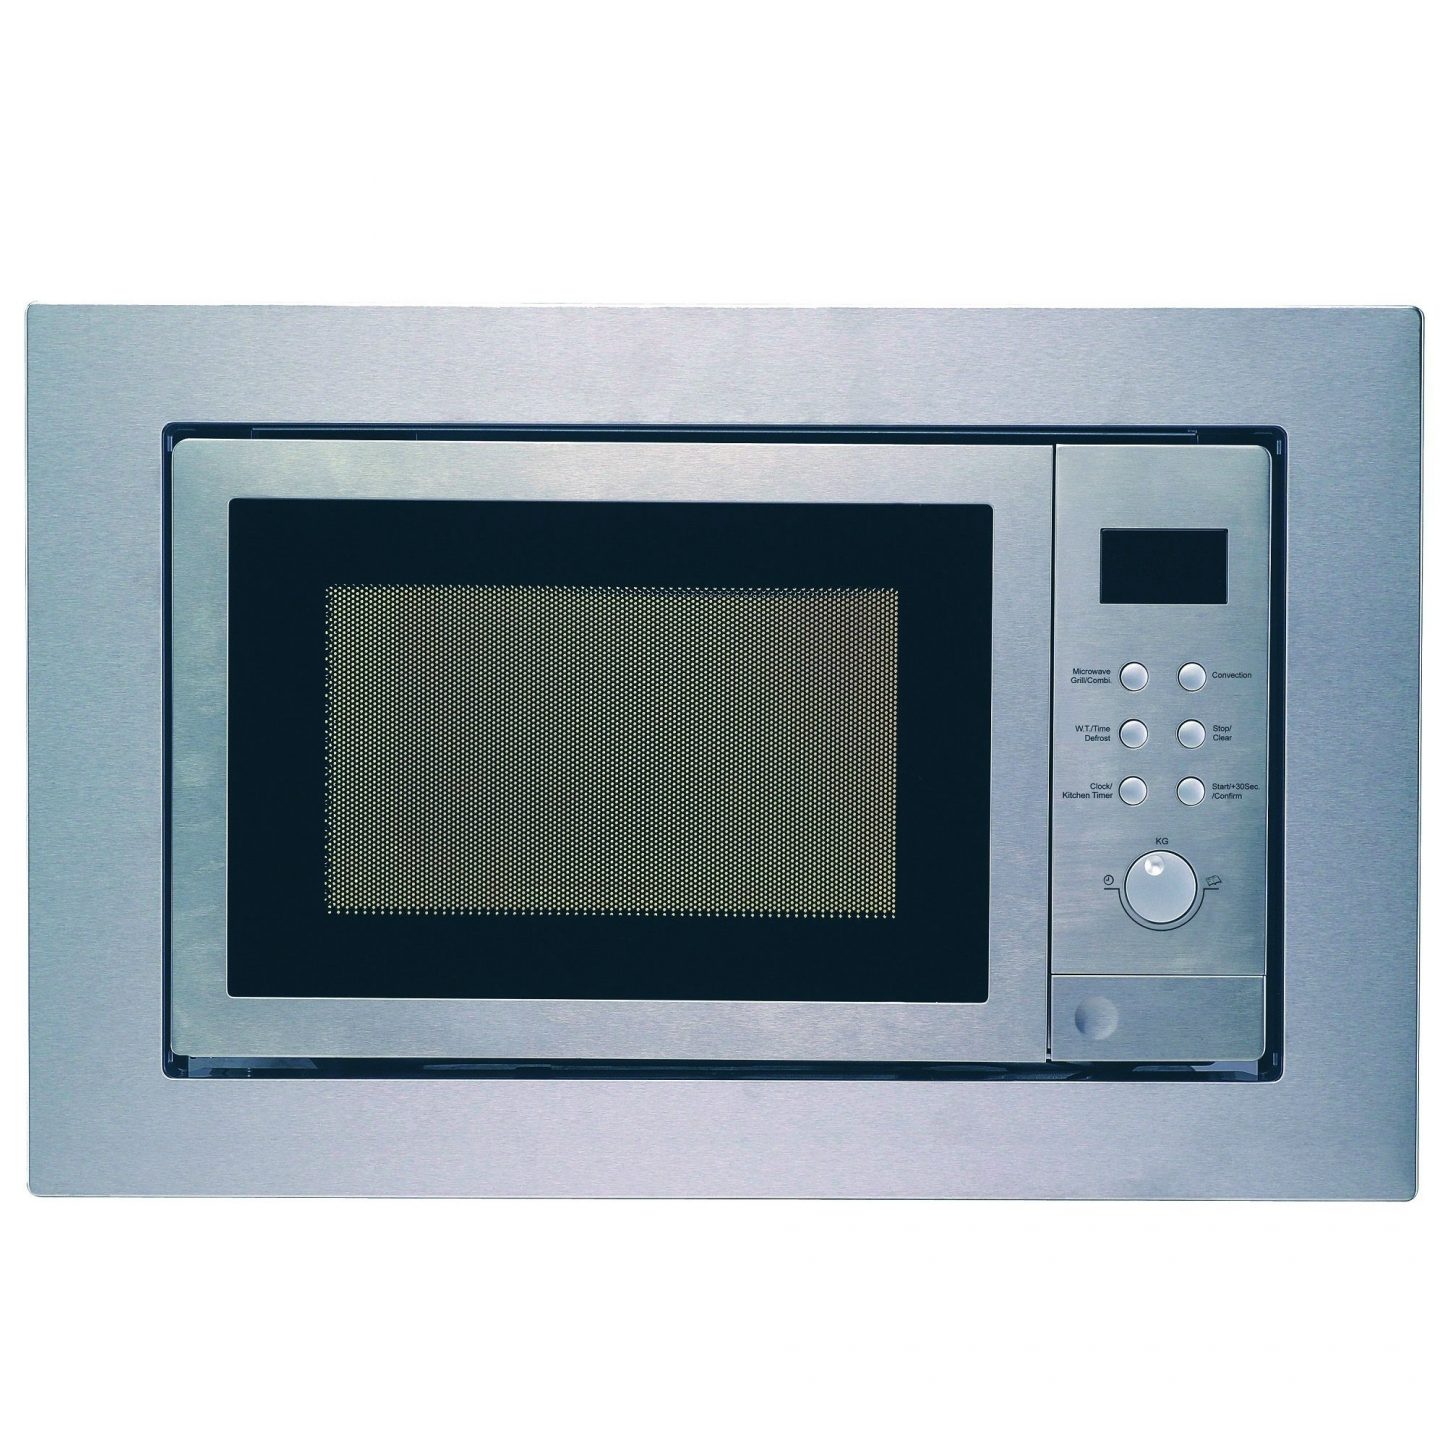 BMOG25LIXH Stainless Steel 25 Litre Cookology Built-in Combi Microwave Oven & Grill